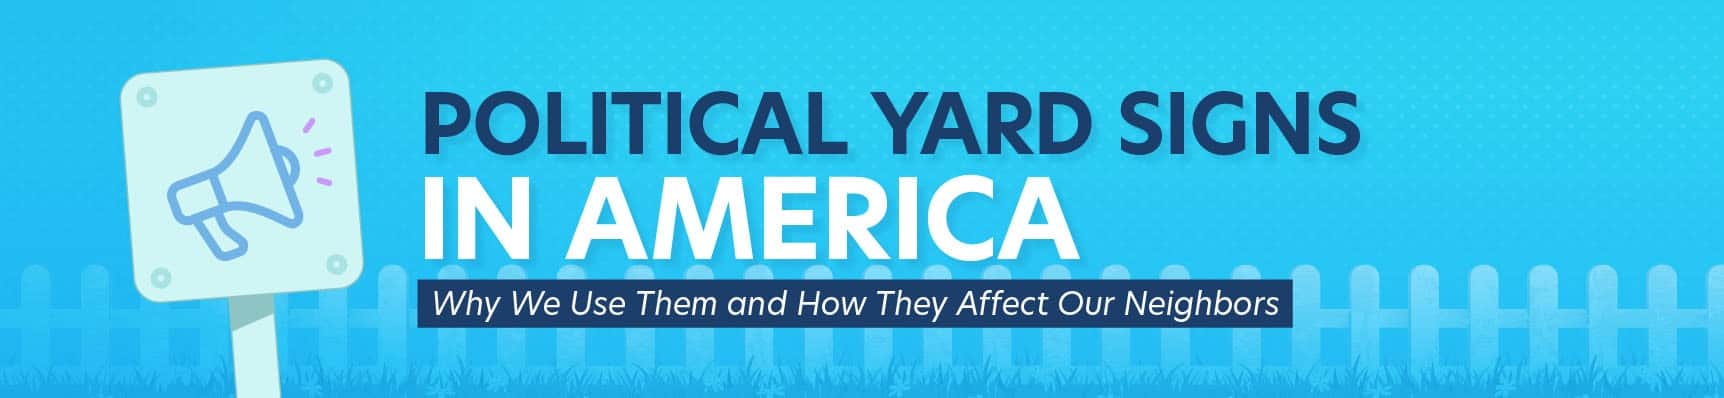 Yard & Home Signage in America Featured Image